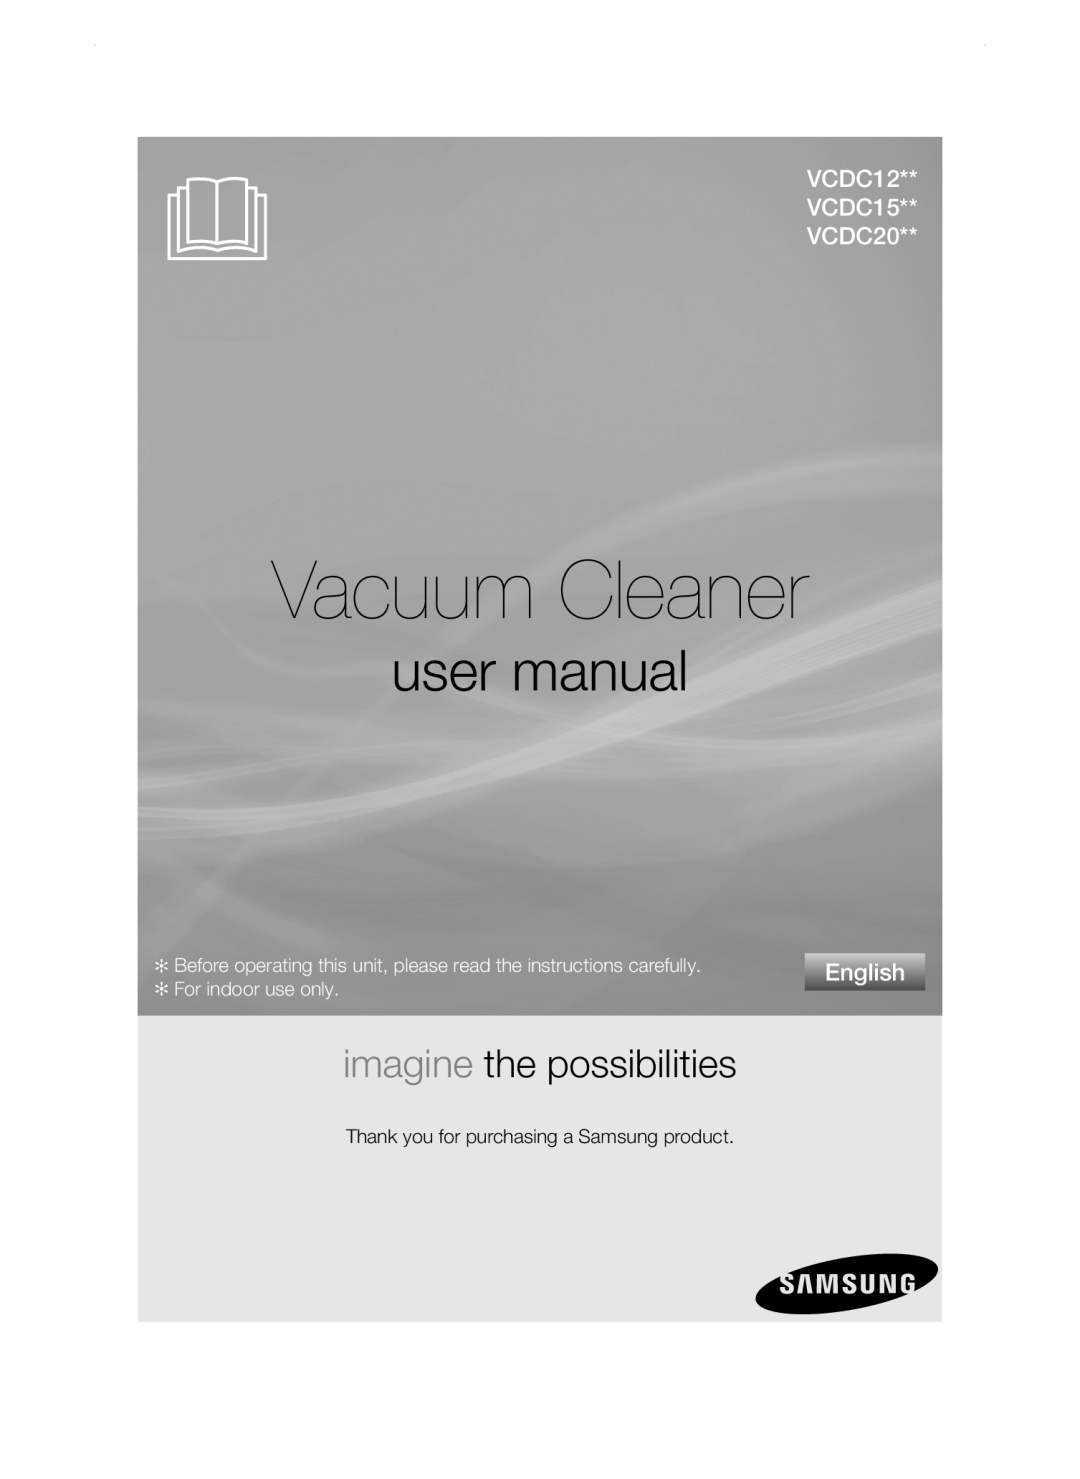 Samsung VC20AVNDCRD/EG Vacuum Cleaner, user manual, imagine the possibilities, VCDC12 VCDC15 VCDC20, English 